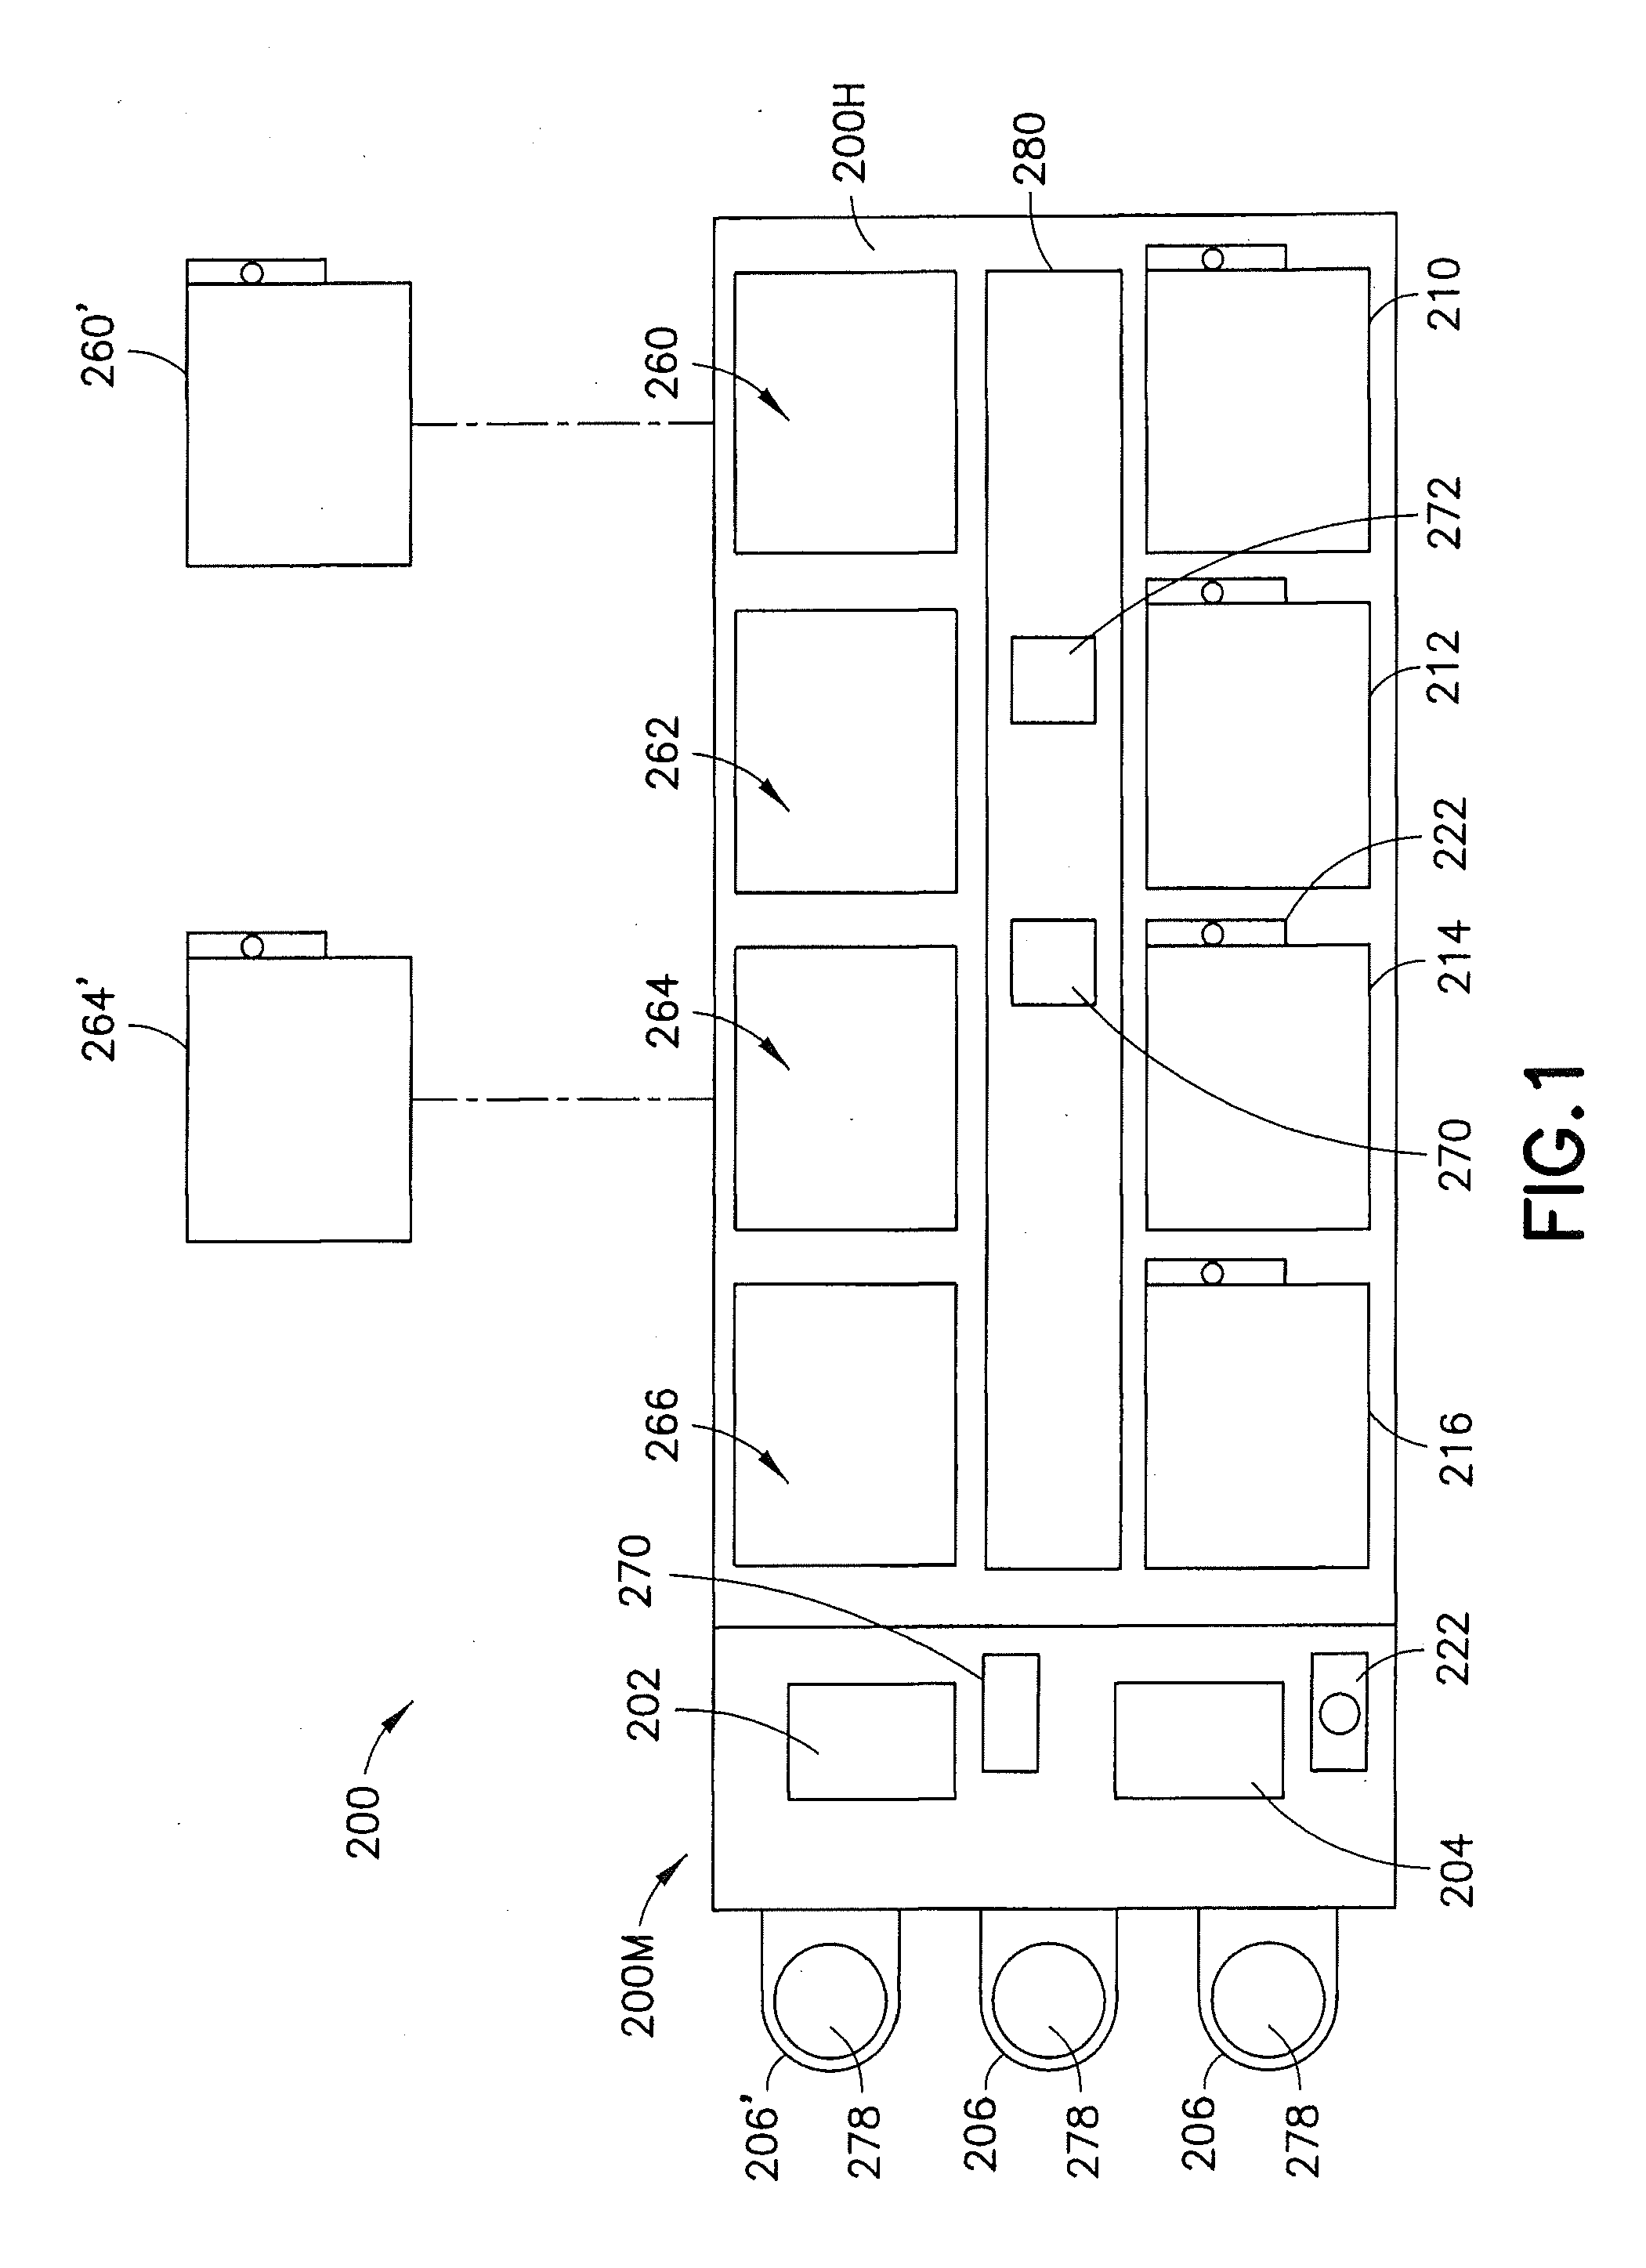 Electro chemical deposition and replenishment apparatus